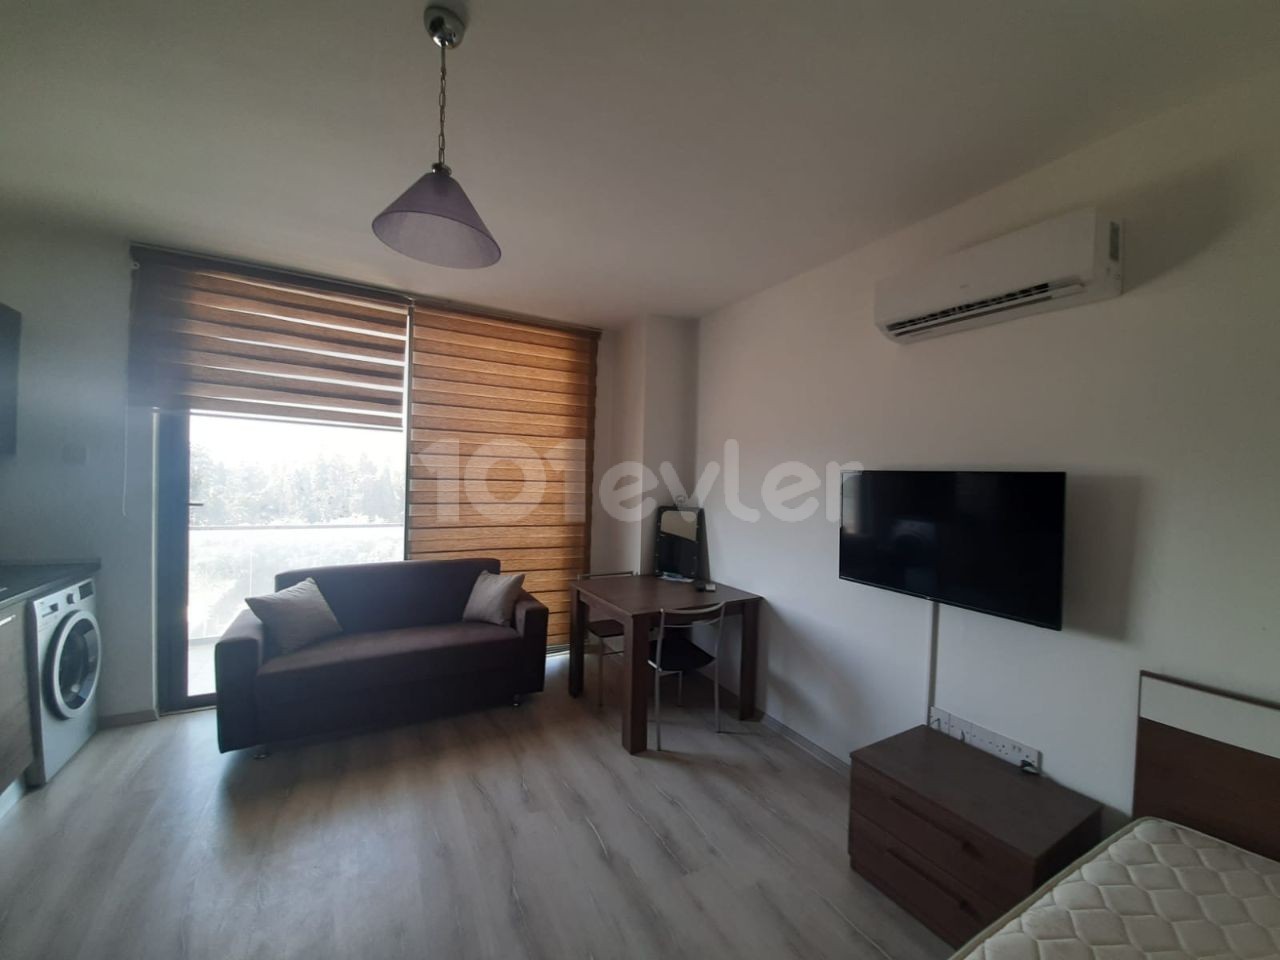 FAMAGUSTA UPTOWN 1+0 STUDIO READY FOR RENT 4.Thu Thu FLOOR PER MONTH$300 6 MONTHS PAYMENT DEPOSIT AND COMMISSION APARTMENT CHARGE PER MONTH £29 ** 